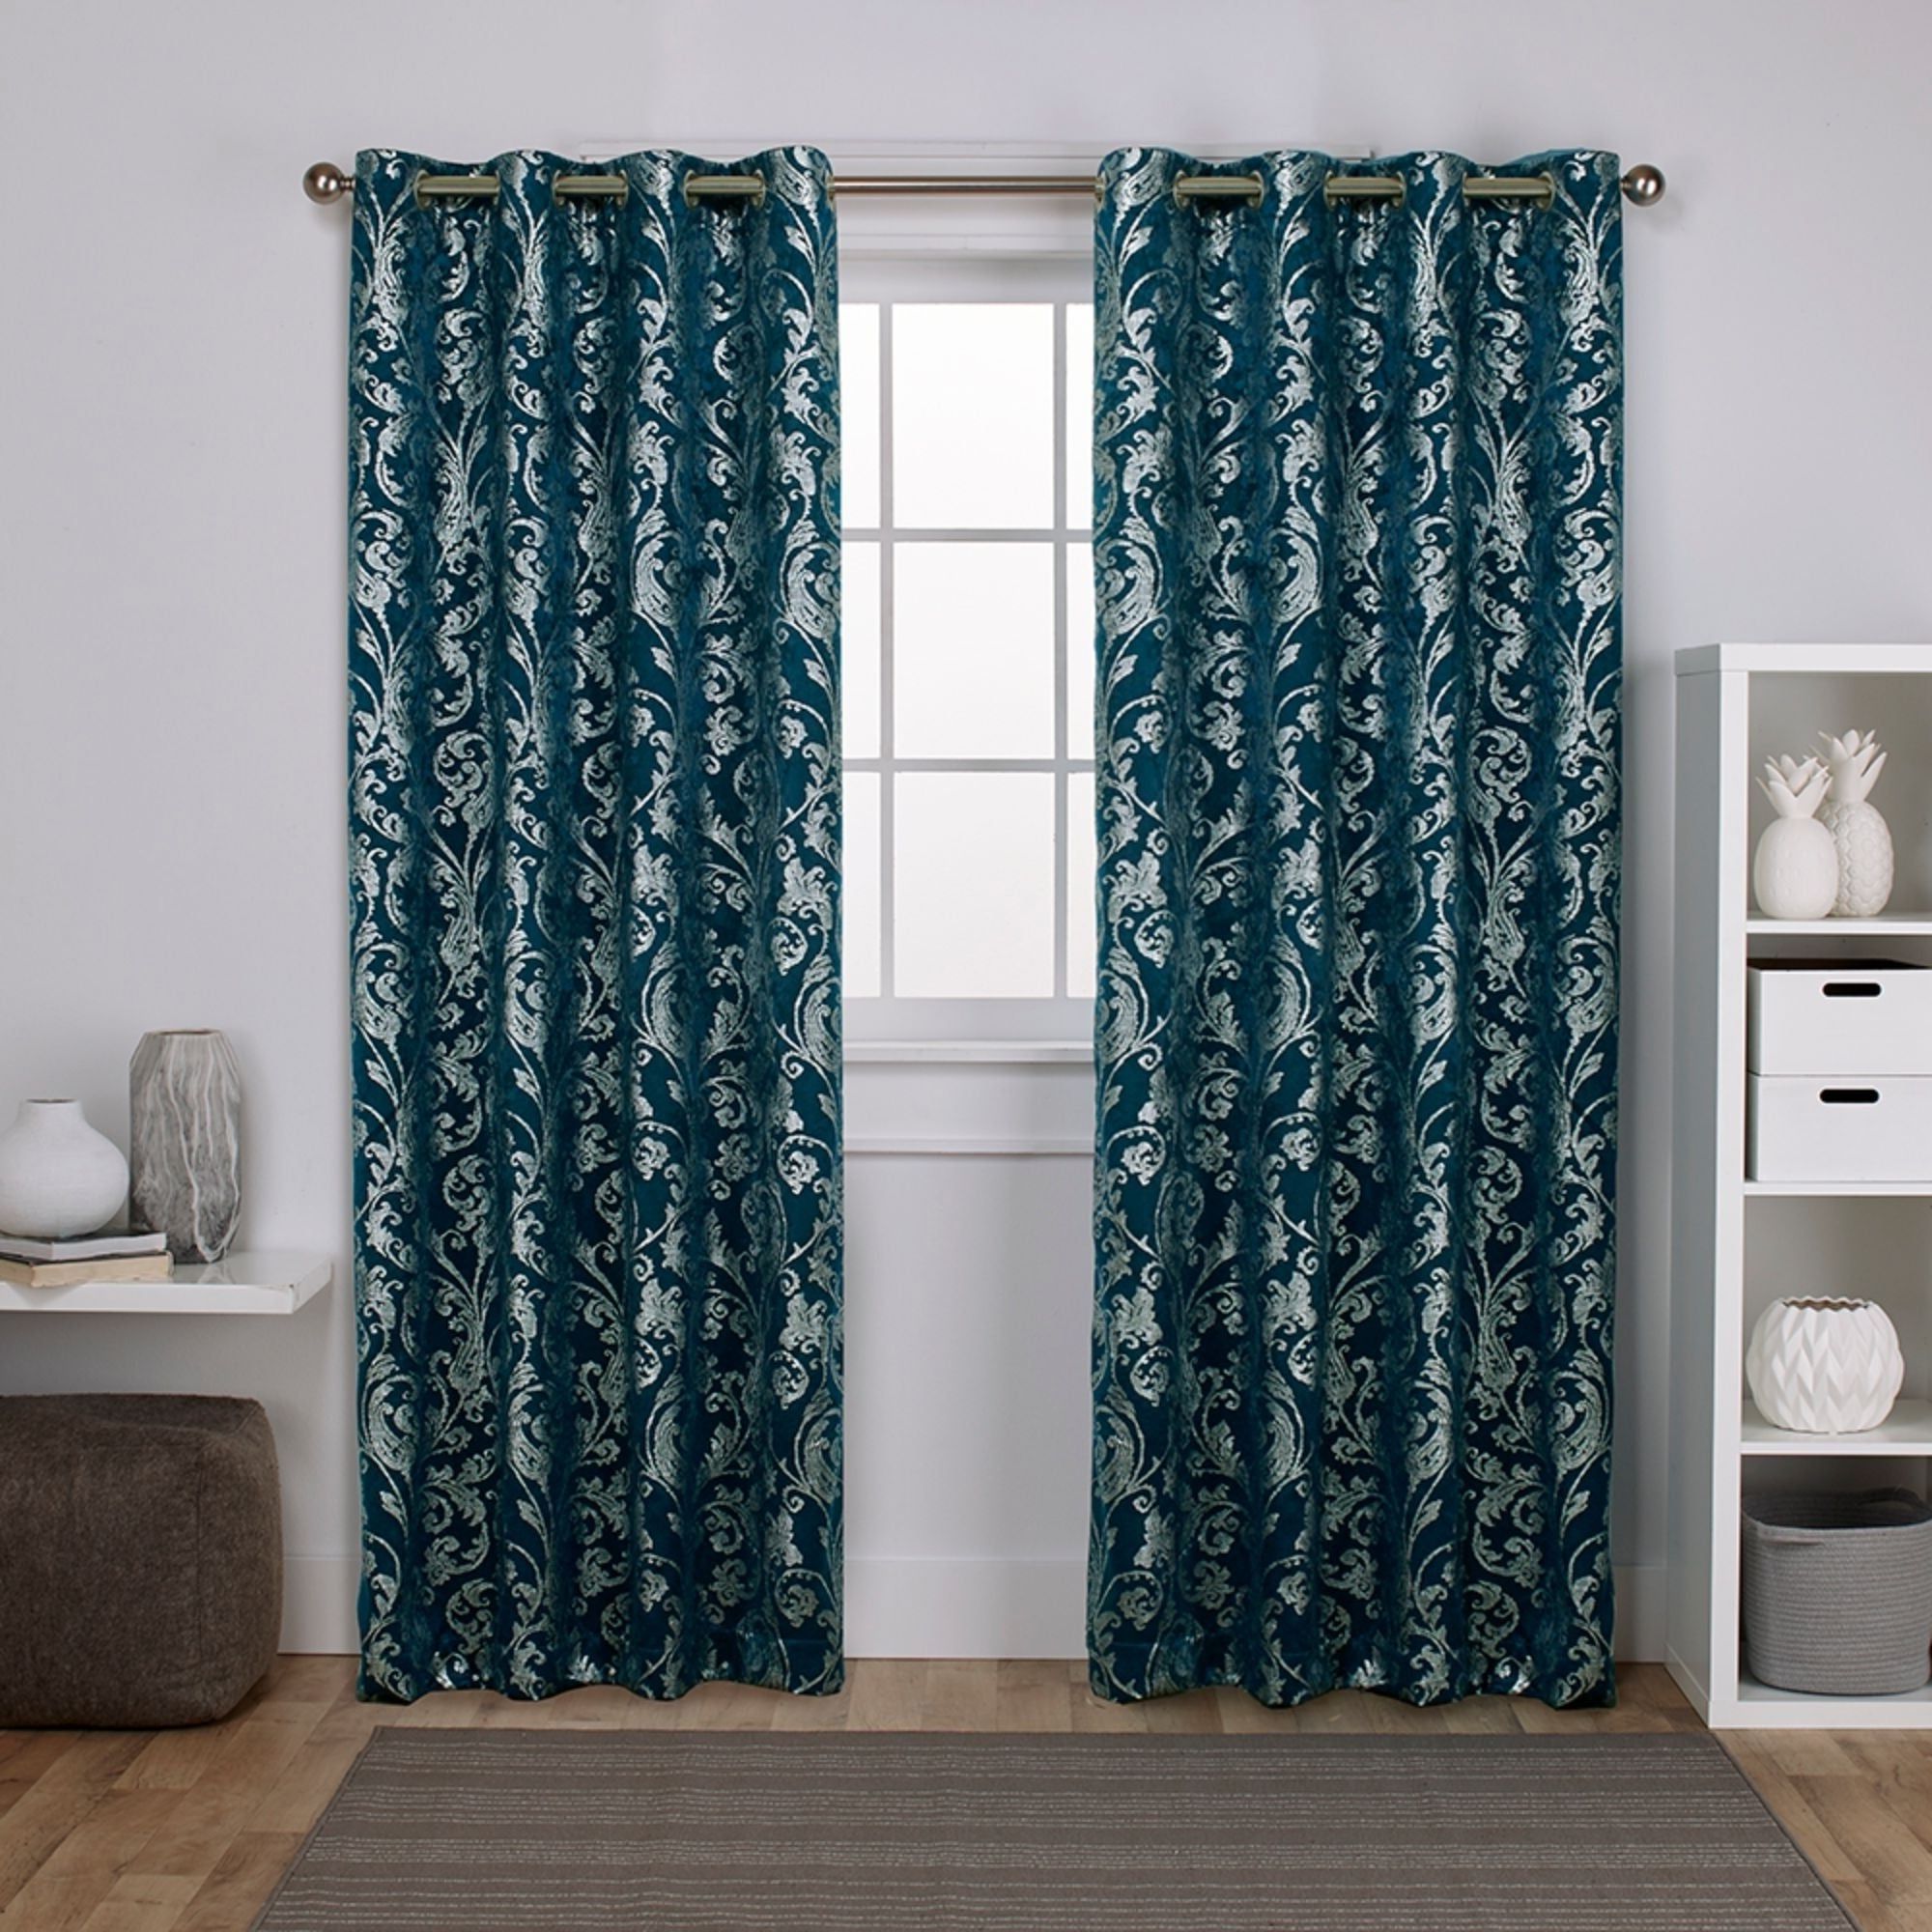 Embossed Thermal Weaved Blackout Grommet Drapery Curtains For Most Recent Ati Home Watford Metallic Blackout Grommet Top Curtain Panel Pair (View 13 of 20)